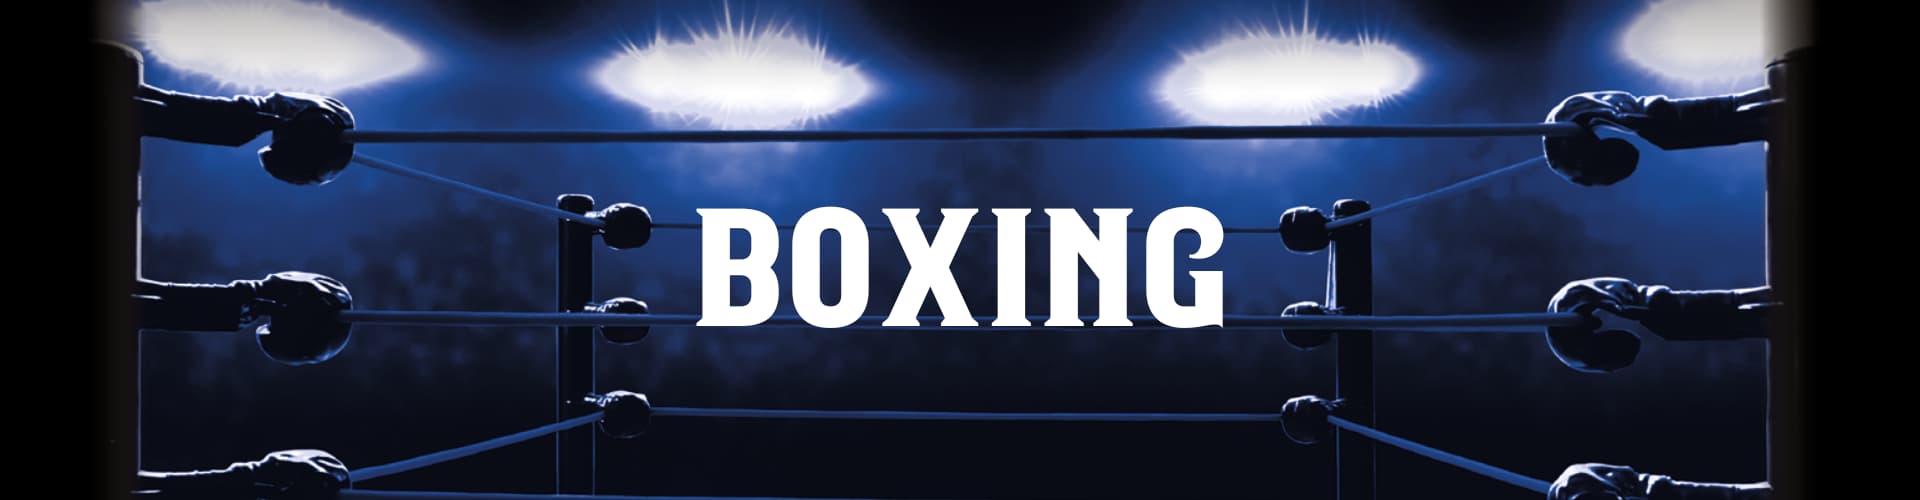 Watch Live Boxing in Knutsford at The Cross Keys Hotel Pub